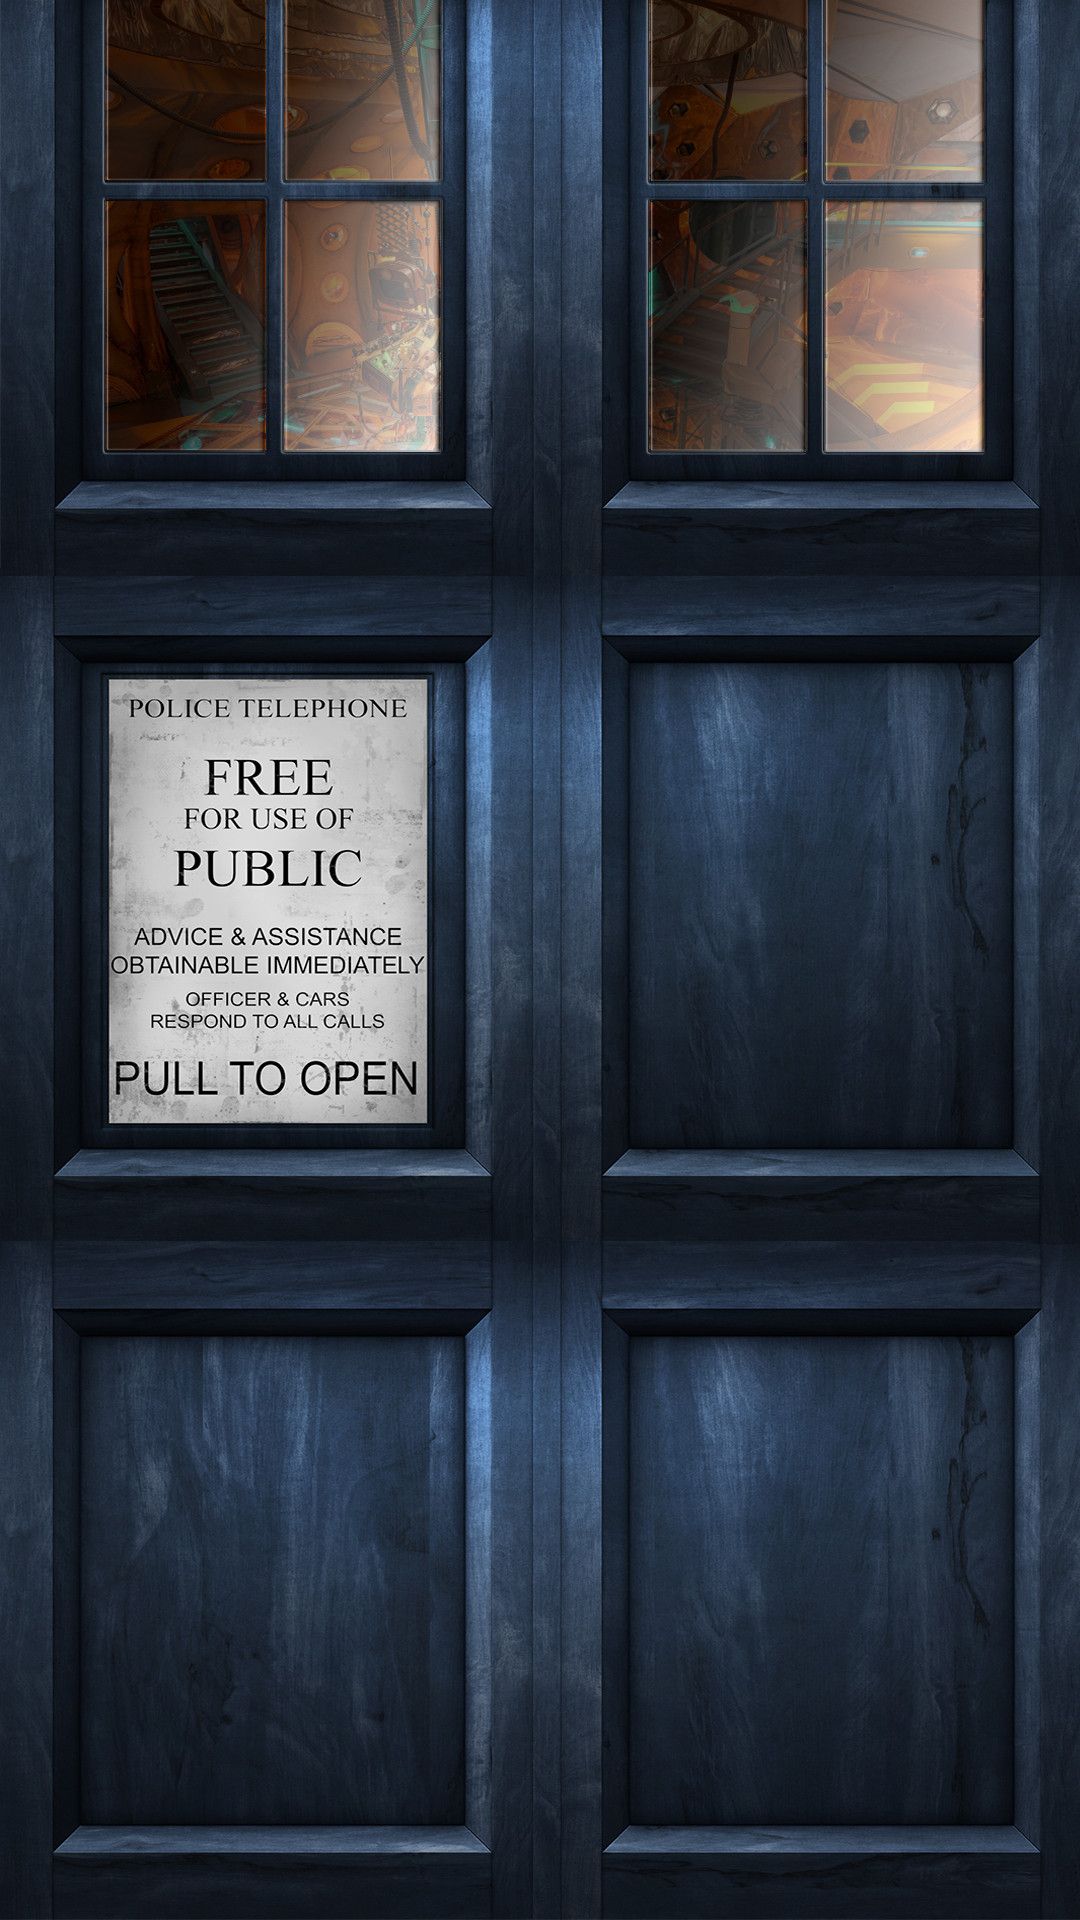 Made a Tardis HQ wallpaper for my phone. doctorwho